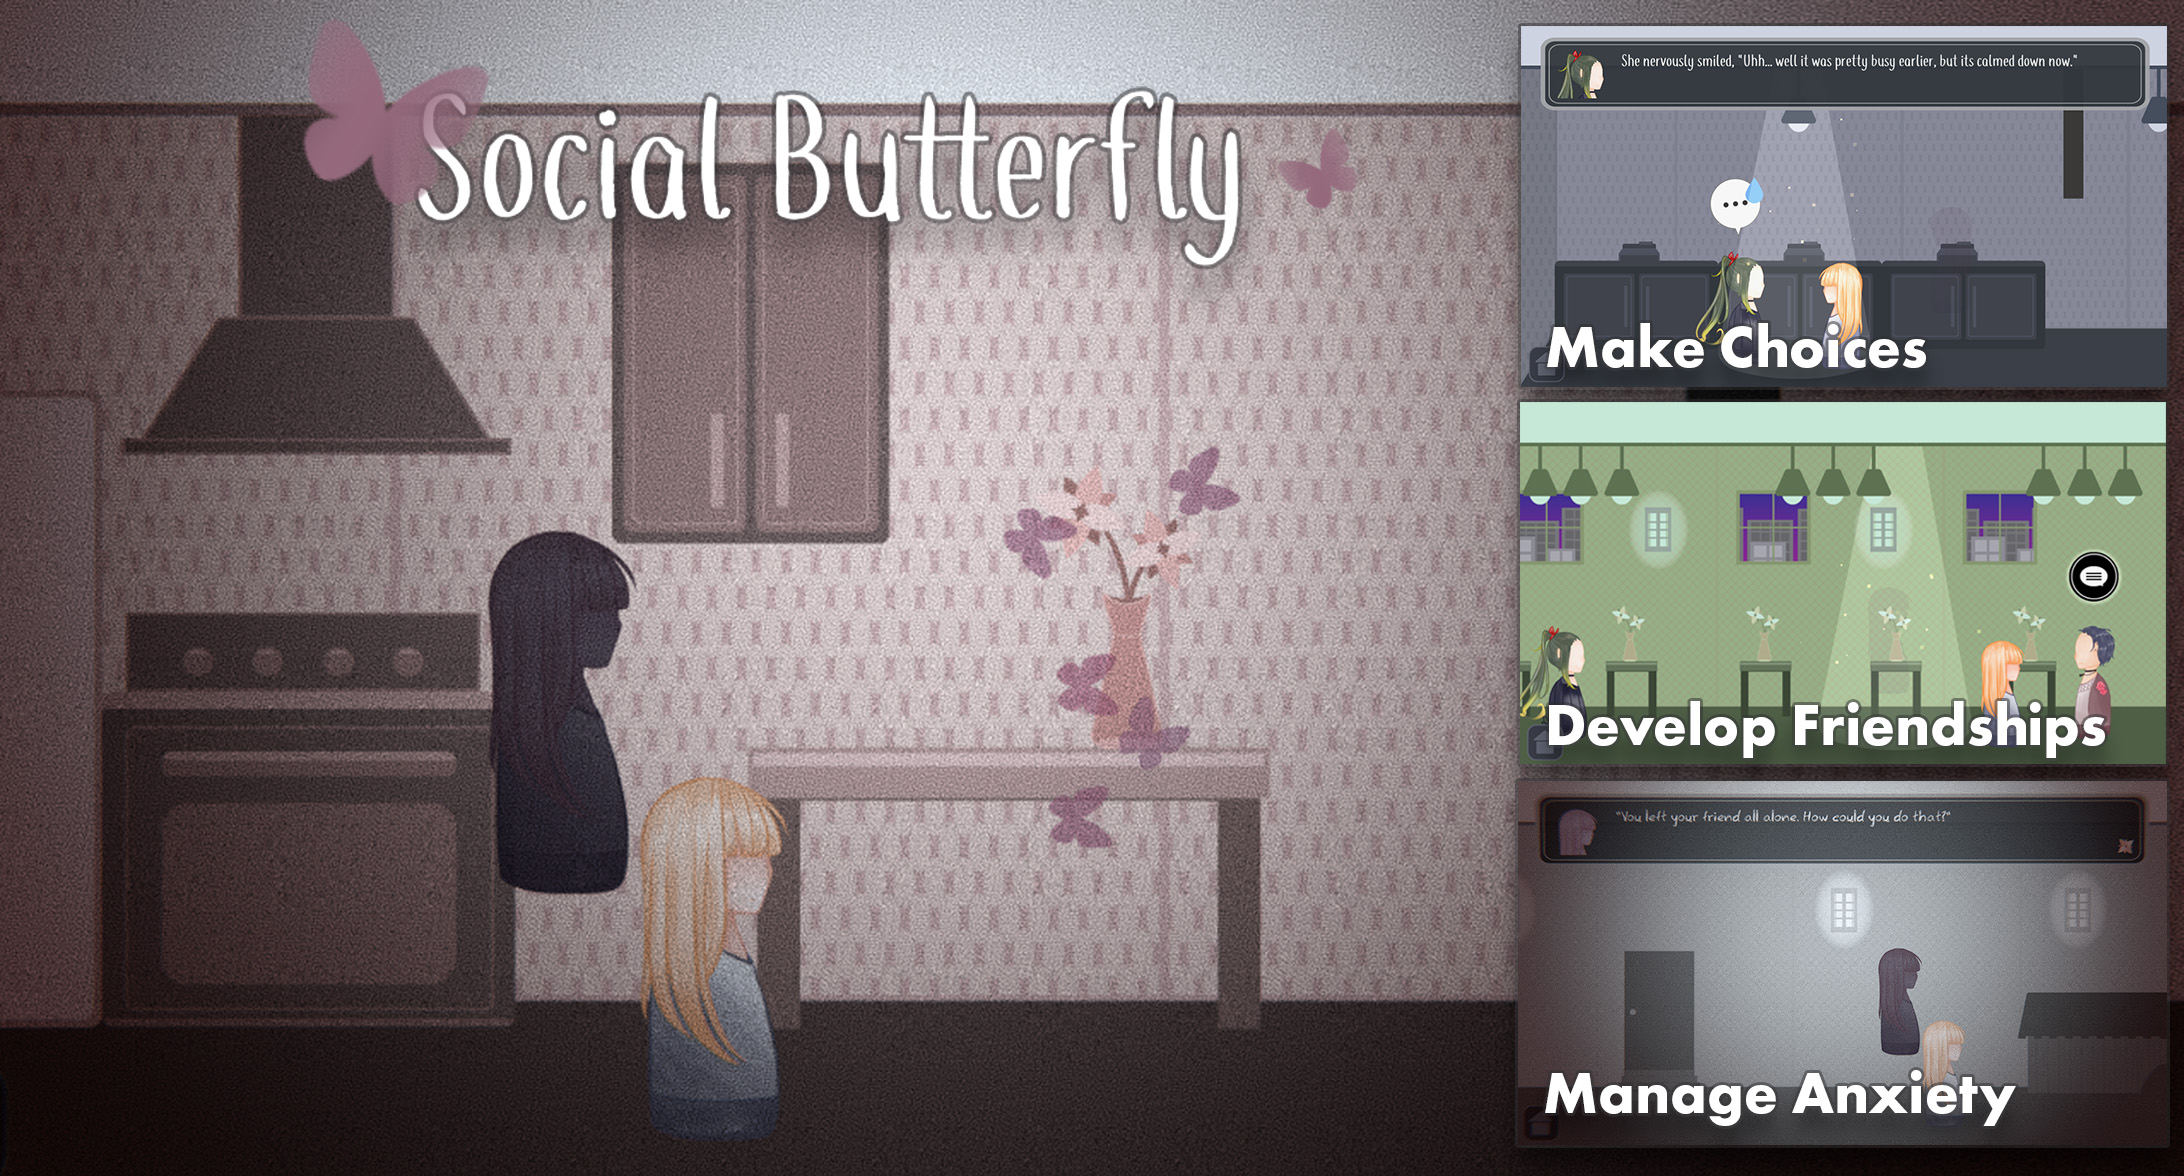 Social Butterfly Overview